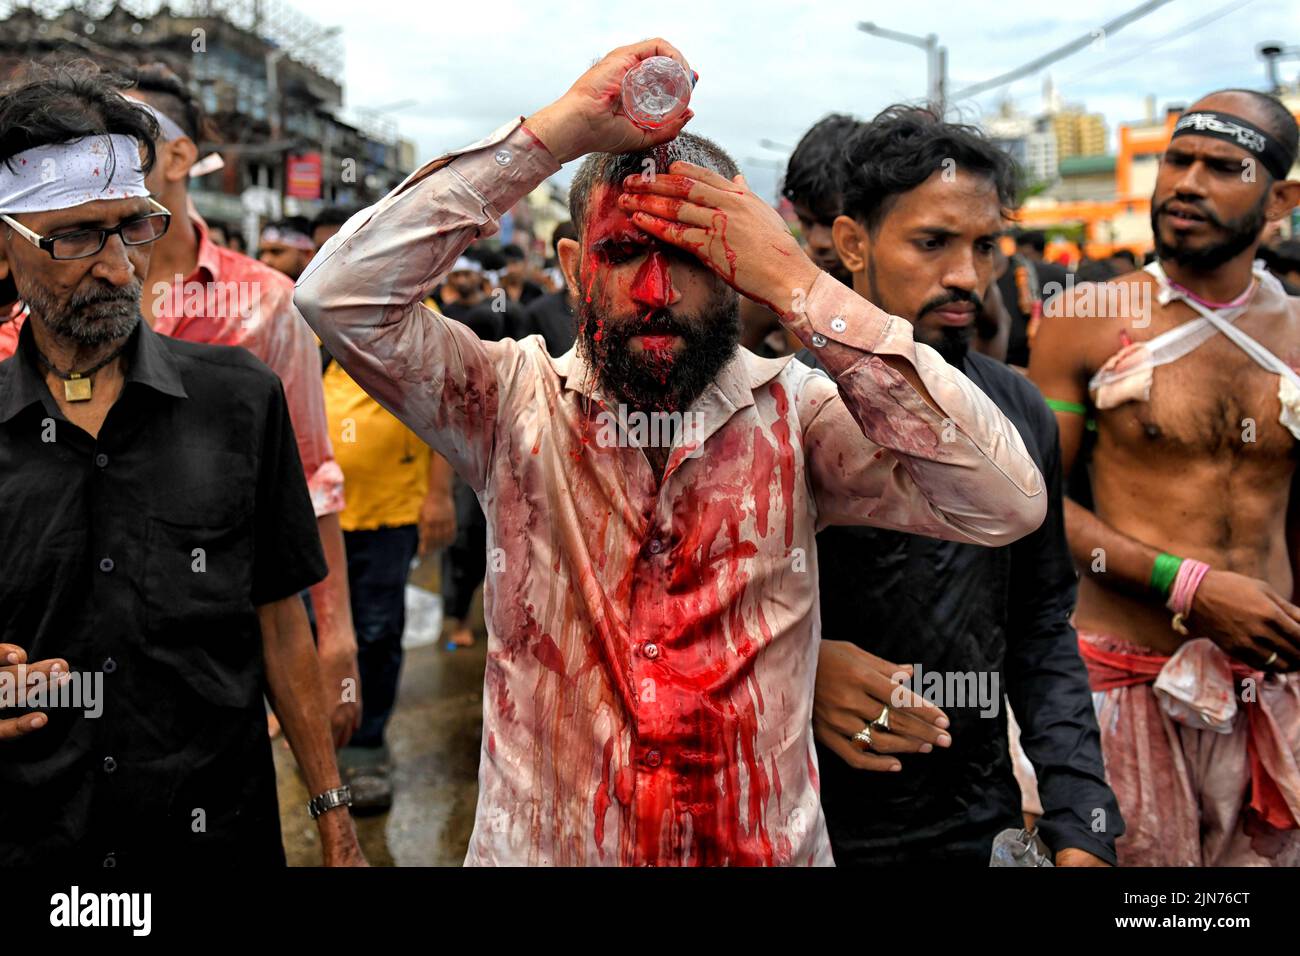 (EDITORS NOTE: Image contains graphic content.) A Shia Muslim devotee covers himself with blood after dangerously wounding himself with Swords while showing his grief during the Muharram procession of Kolkata. Muharram is the first month of the Islamic calendar & Ashura is the tenth day of the month of Muharram on which the commemoration of the martyrdom of Imam Hussain, the grandson of Prophet Muhammad (PBUH), during the battle of Karbala, is done. It is part of Mourning for Shia Muslims and a day of fasting for Sunni Muslims that is observed all over the World. Stock Photo